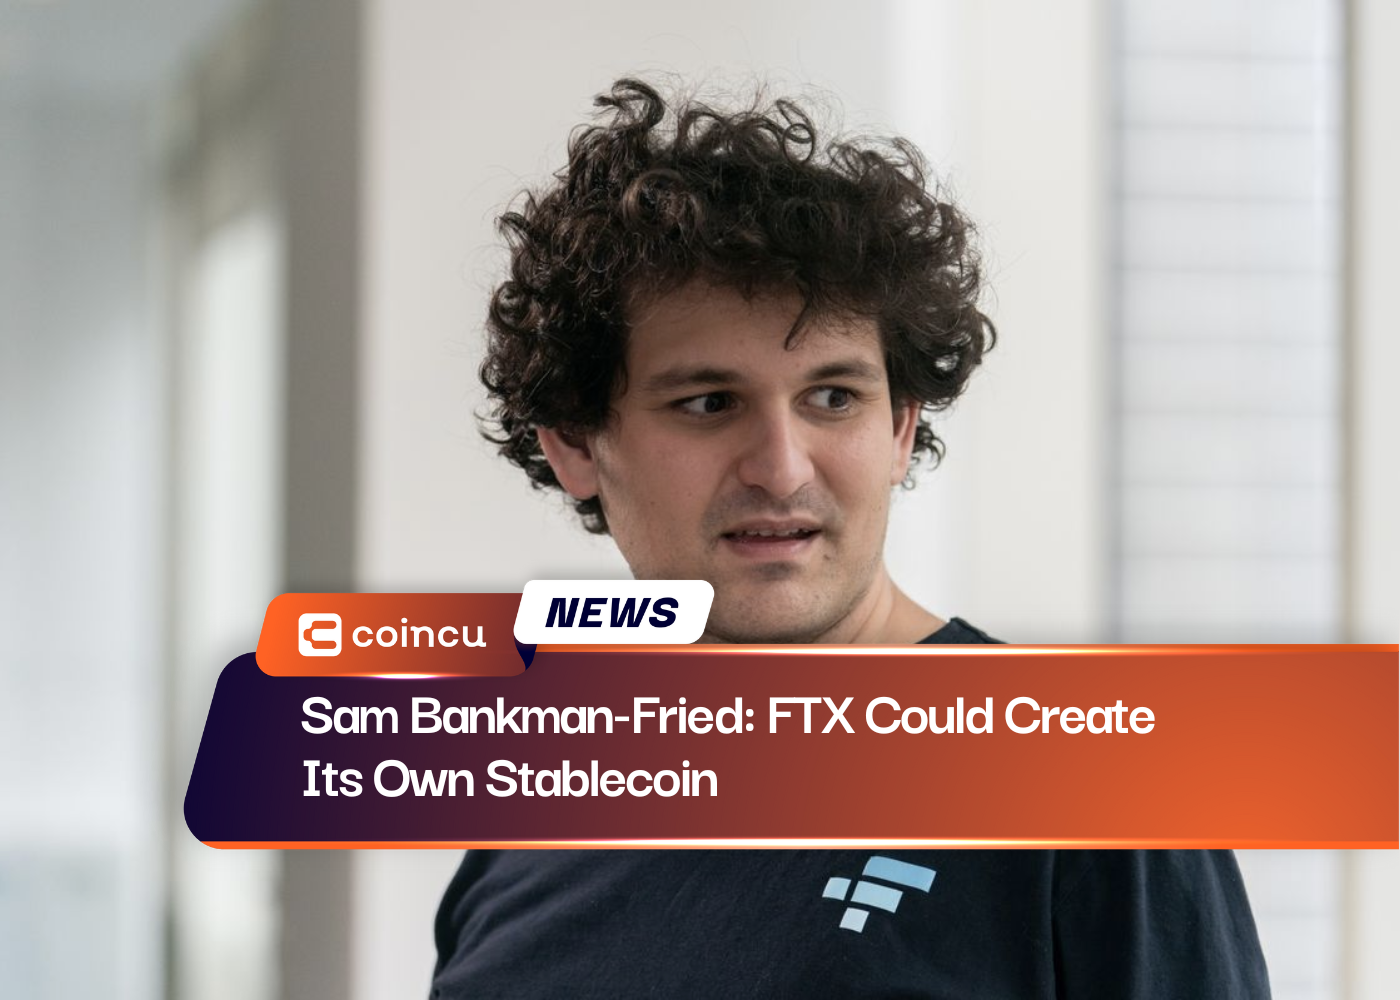 Sam Bankman-Fried: FTX Could Create Its Own Stablecoin